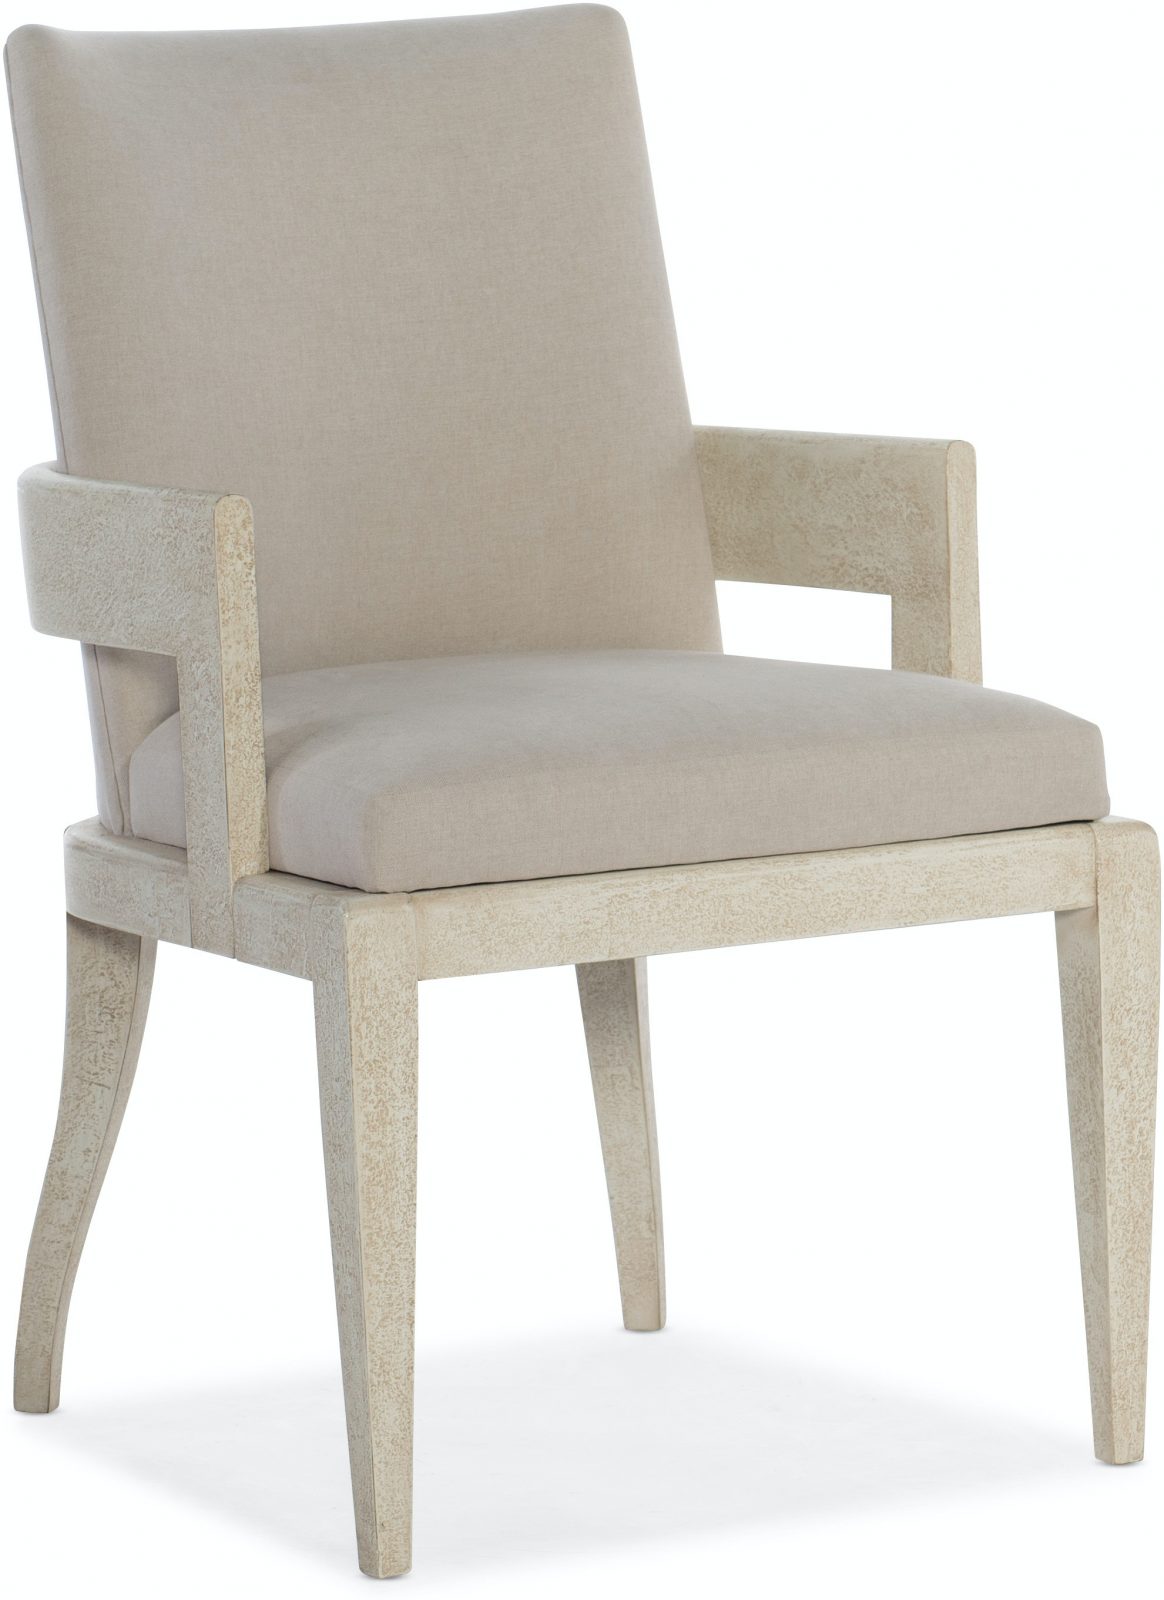 Cascade Upholstered arm chair